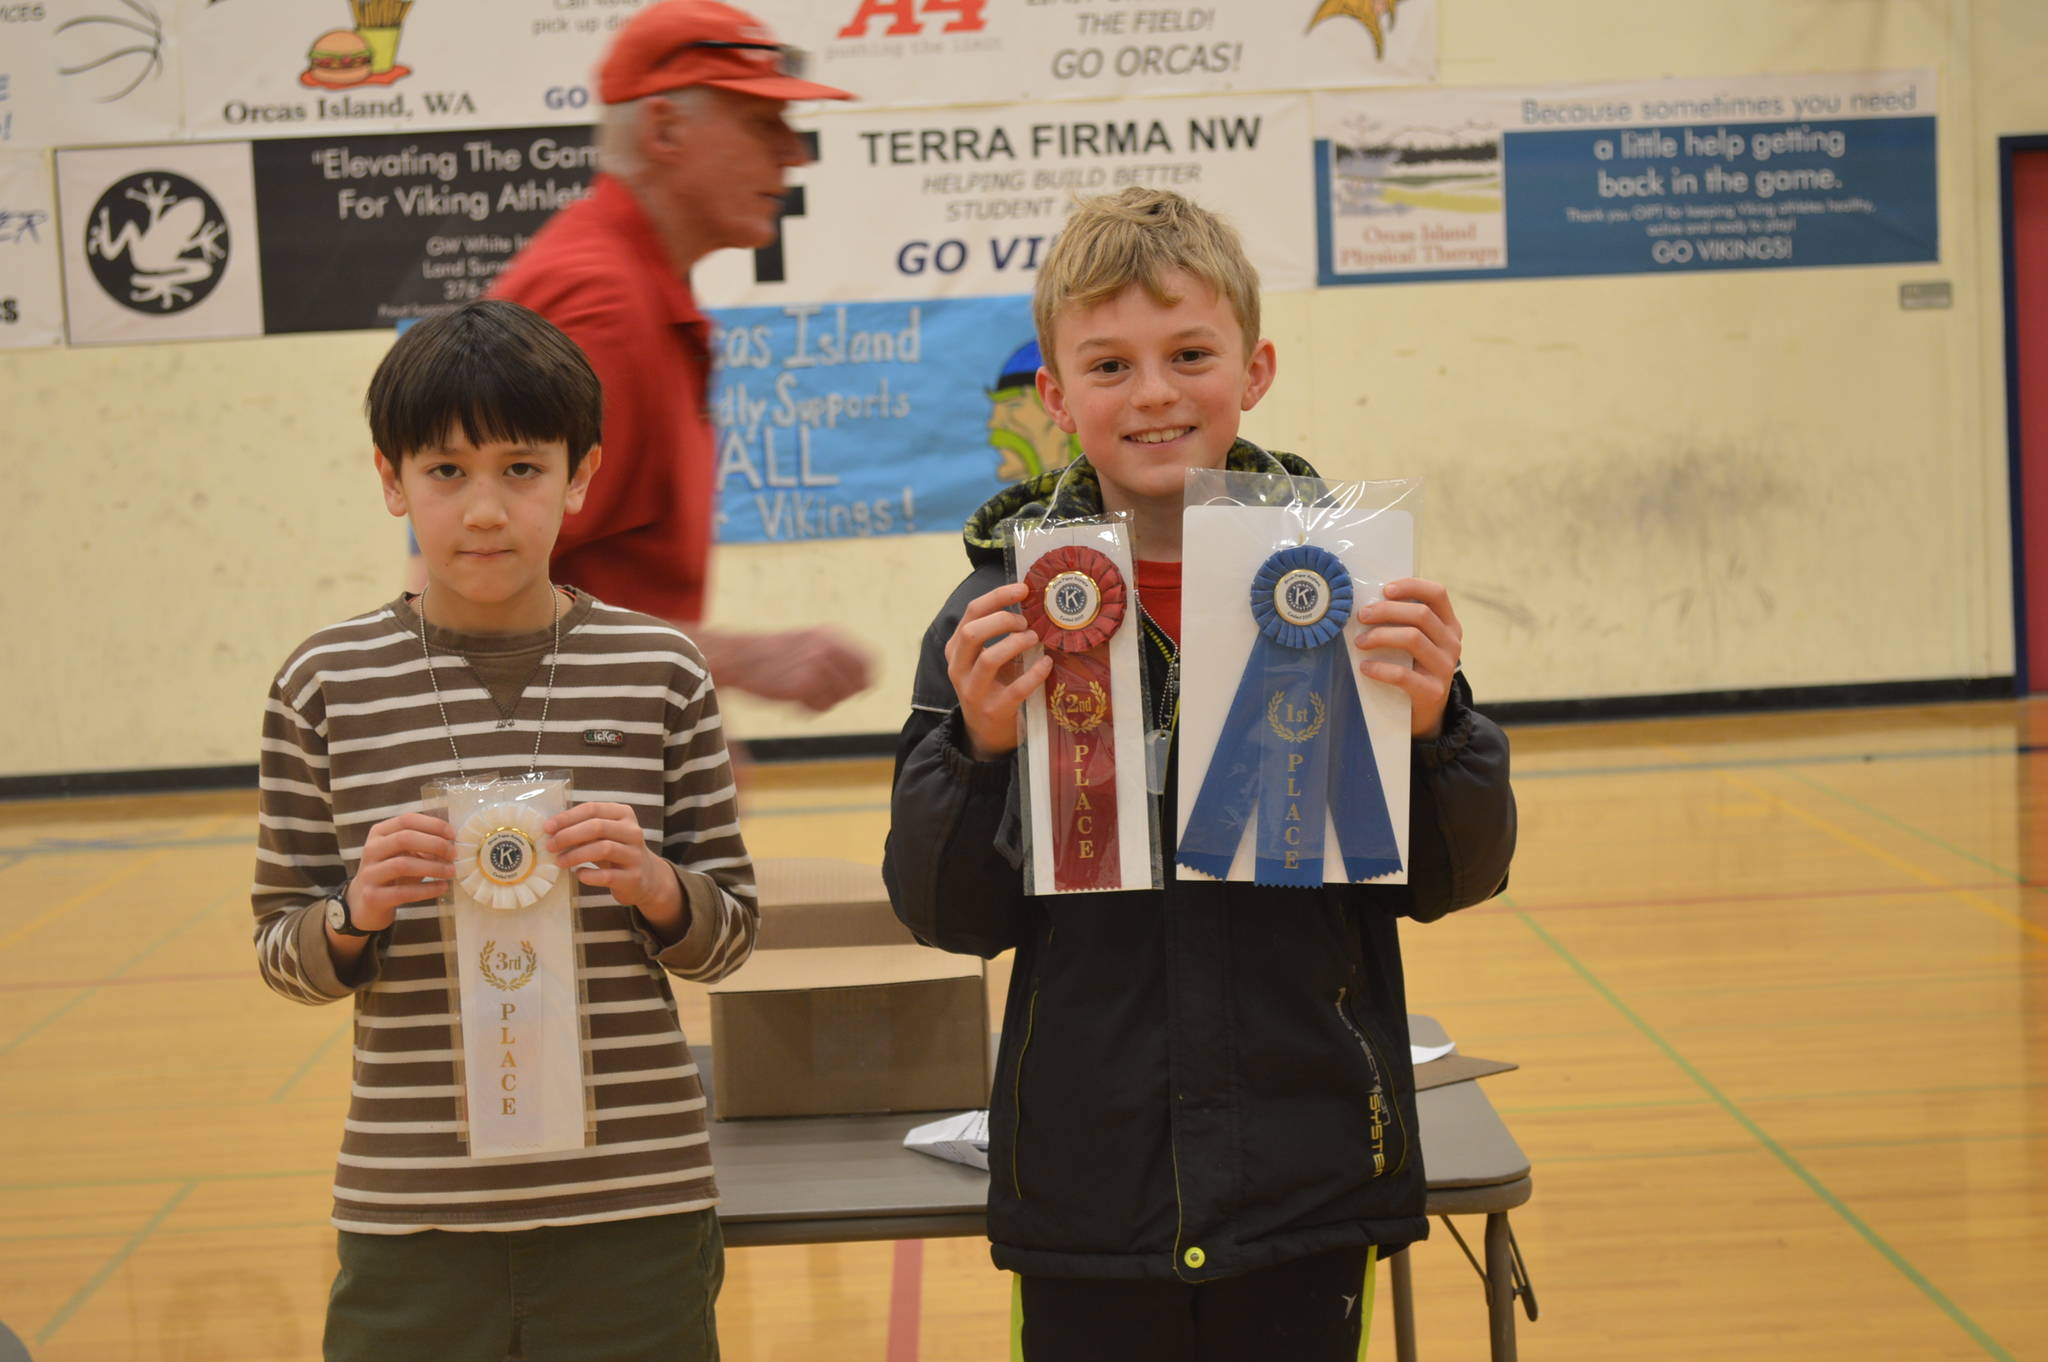 Paper airplane contest results